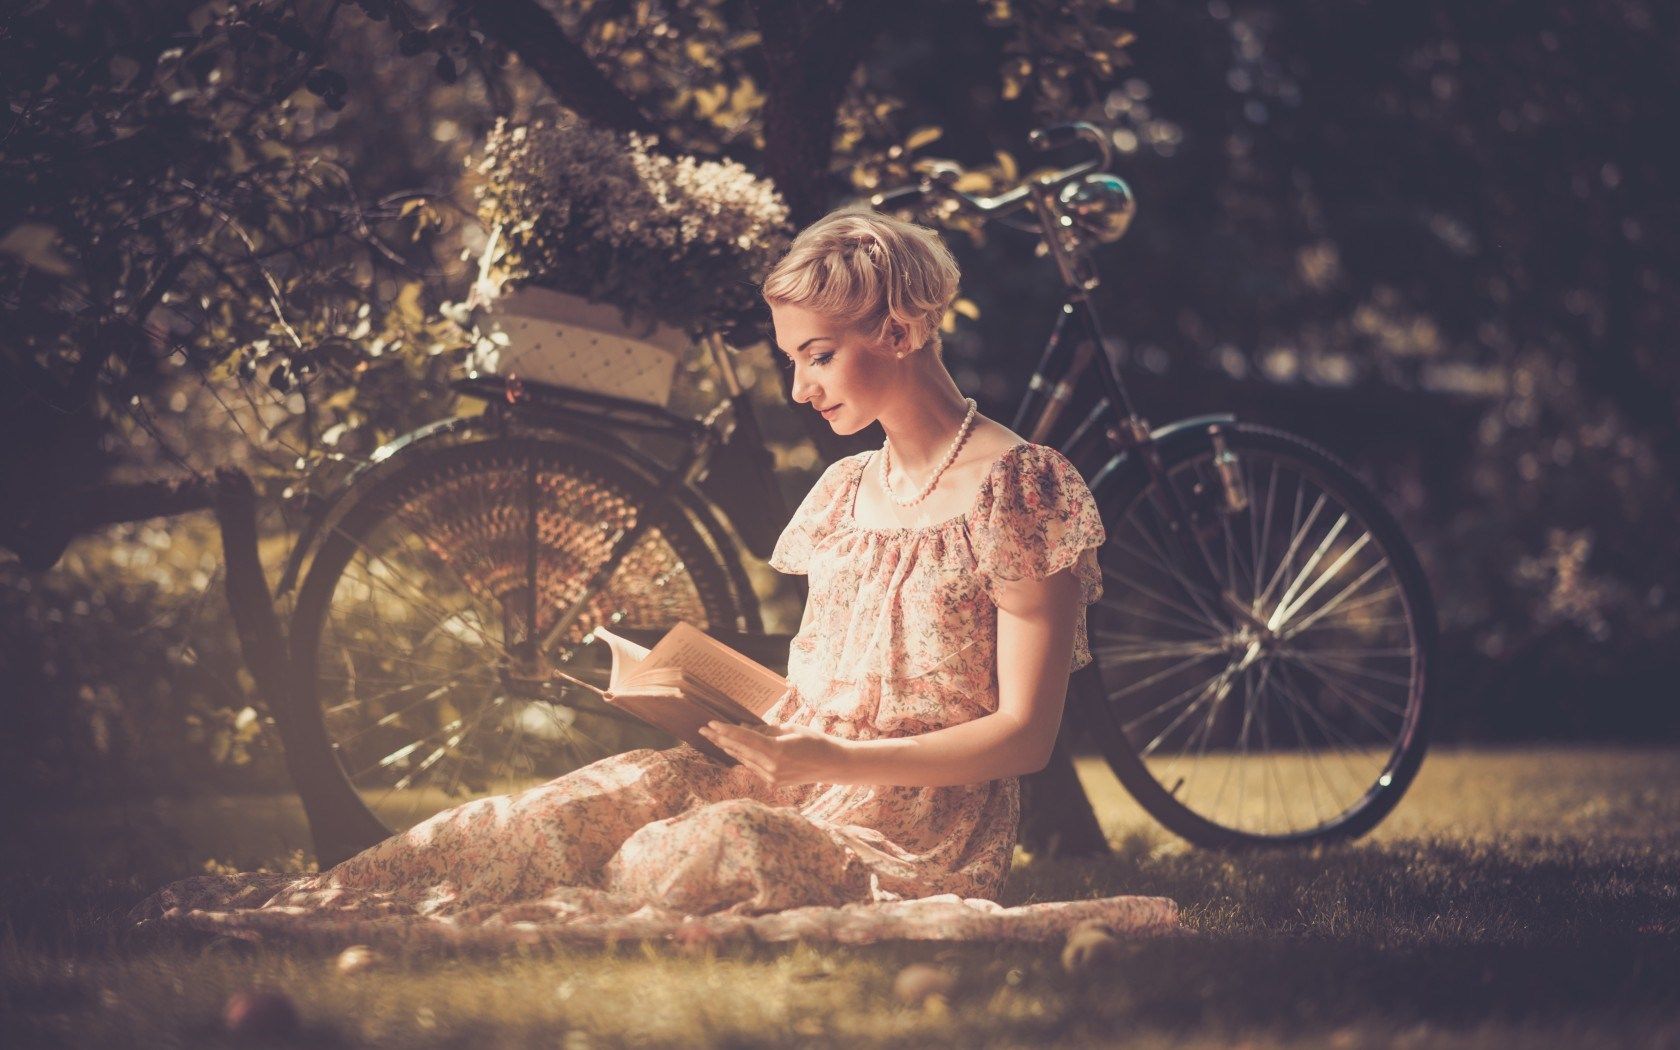 HD wallpaper, Beads, Bicycle, Blonde, Style, Nature, Retro, Girl, Dress